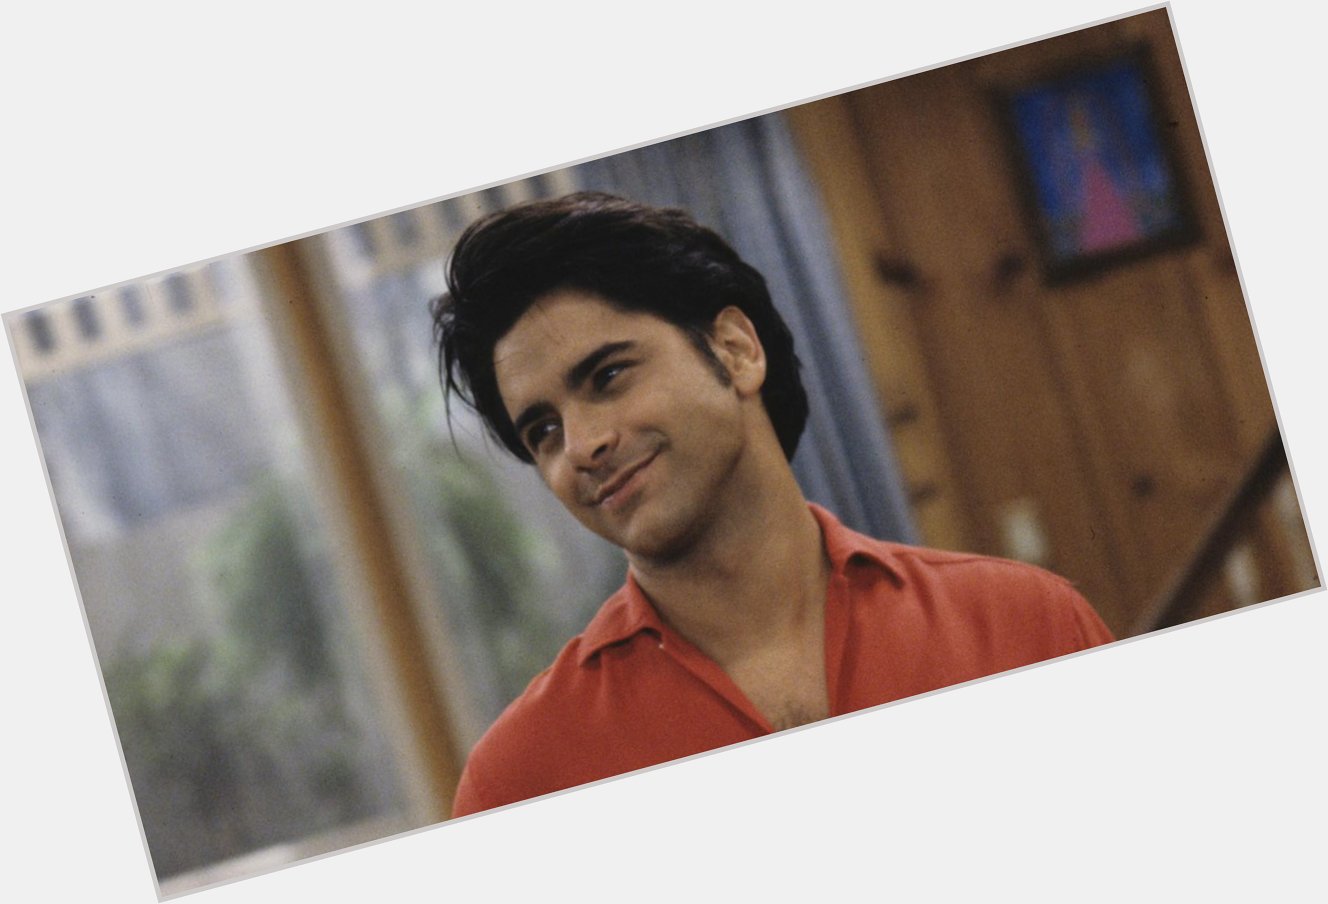 8/19: Happy 52nd Birthday 2 actor John Stamos! Fave in Full House, many more!   